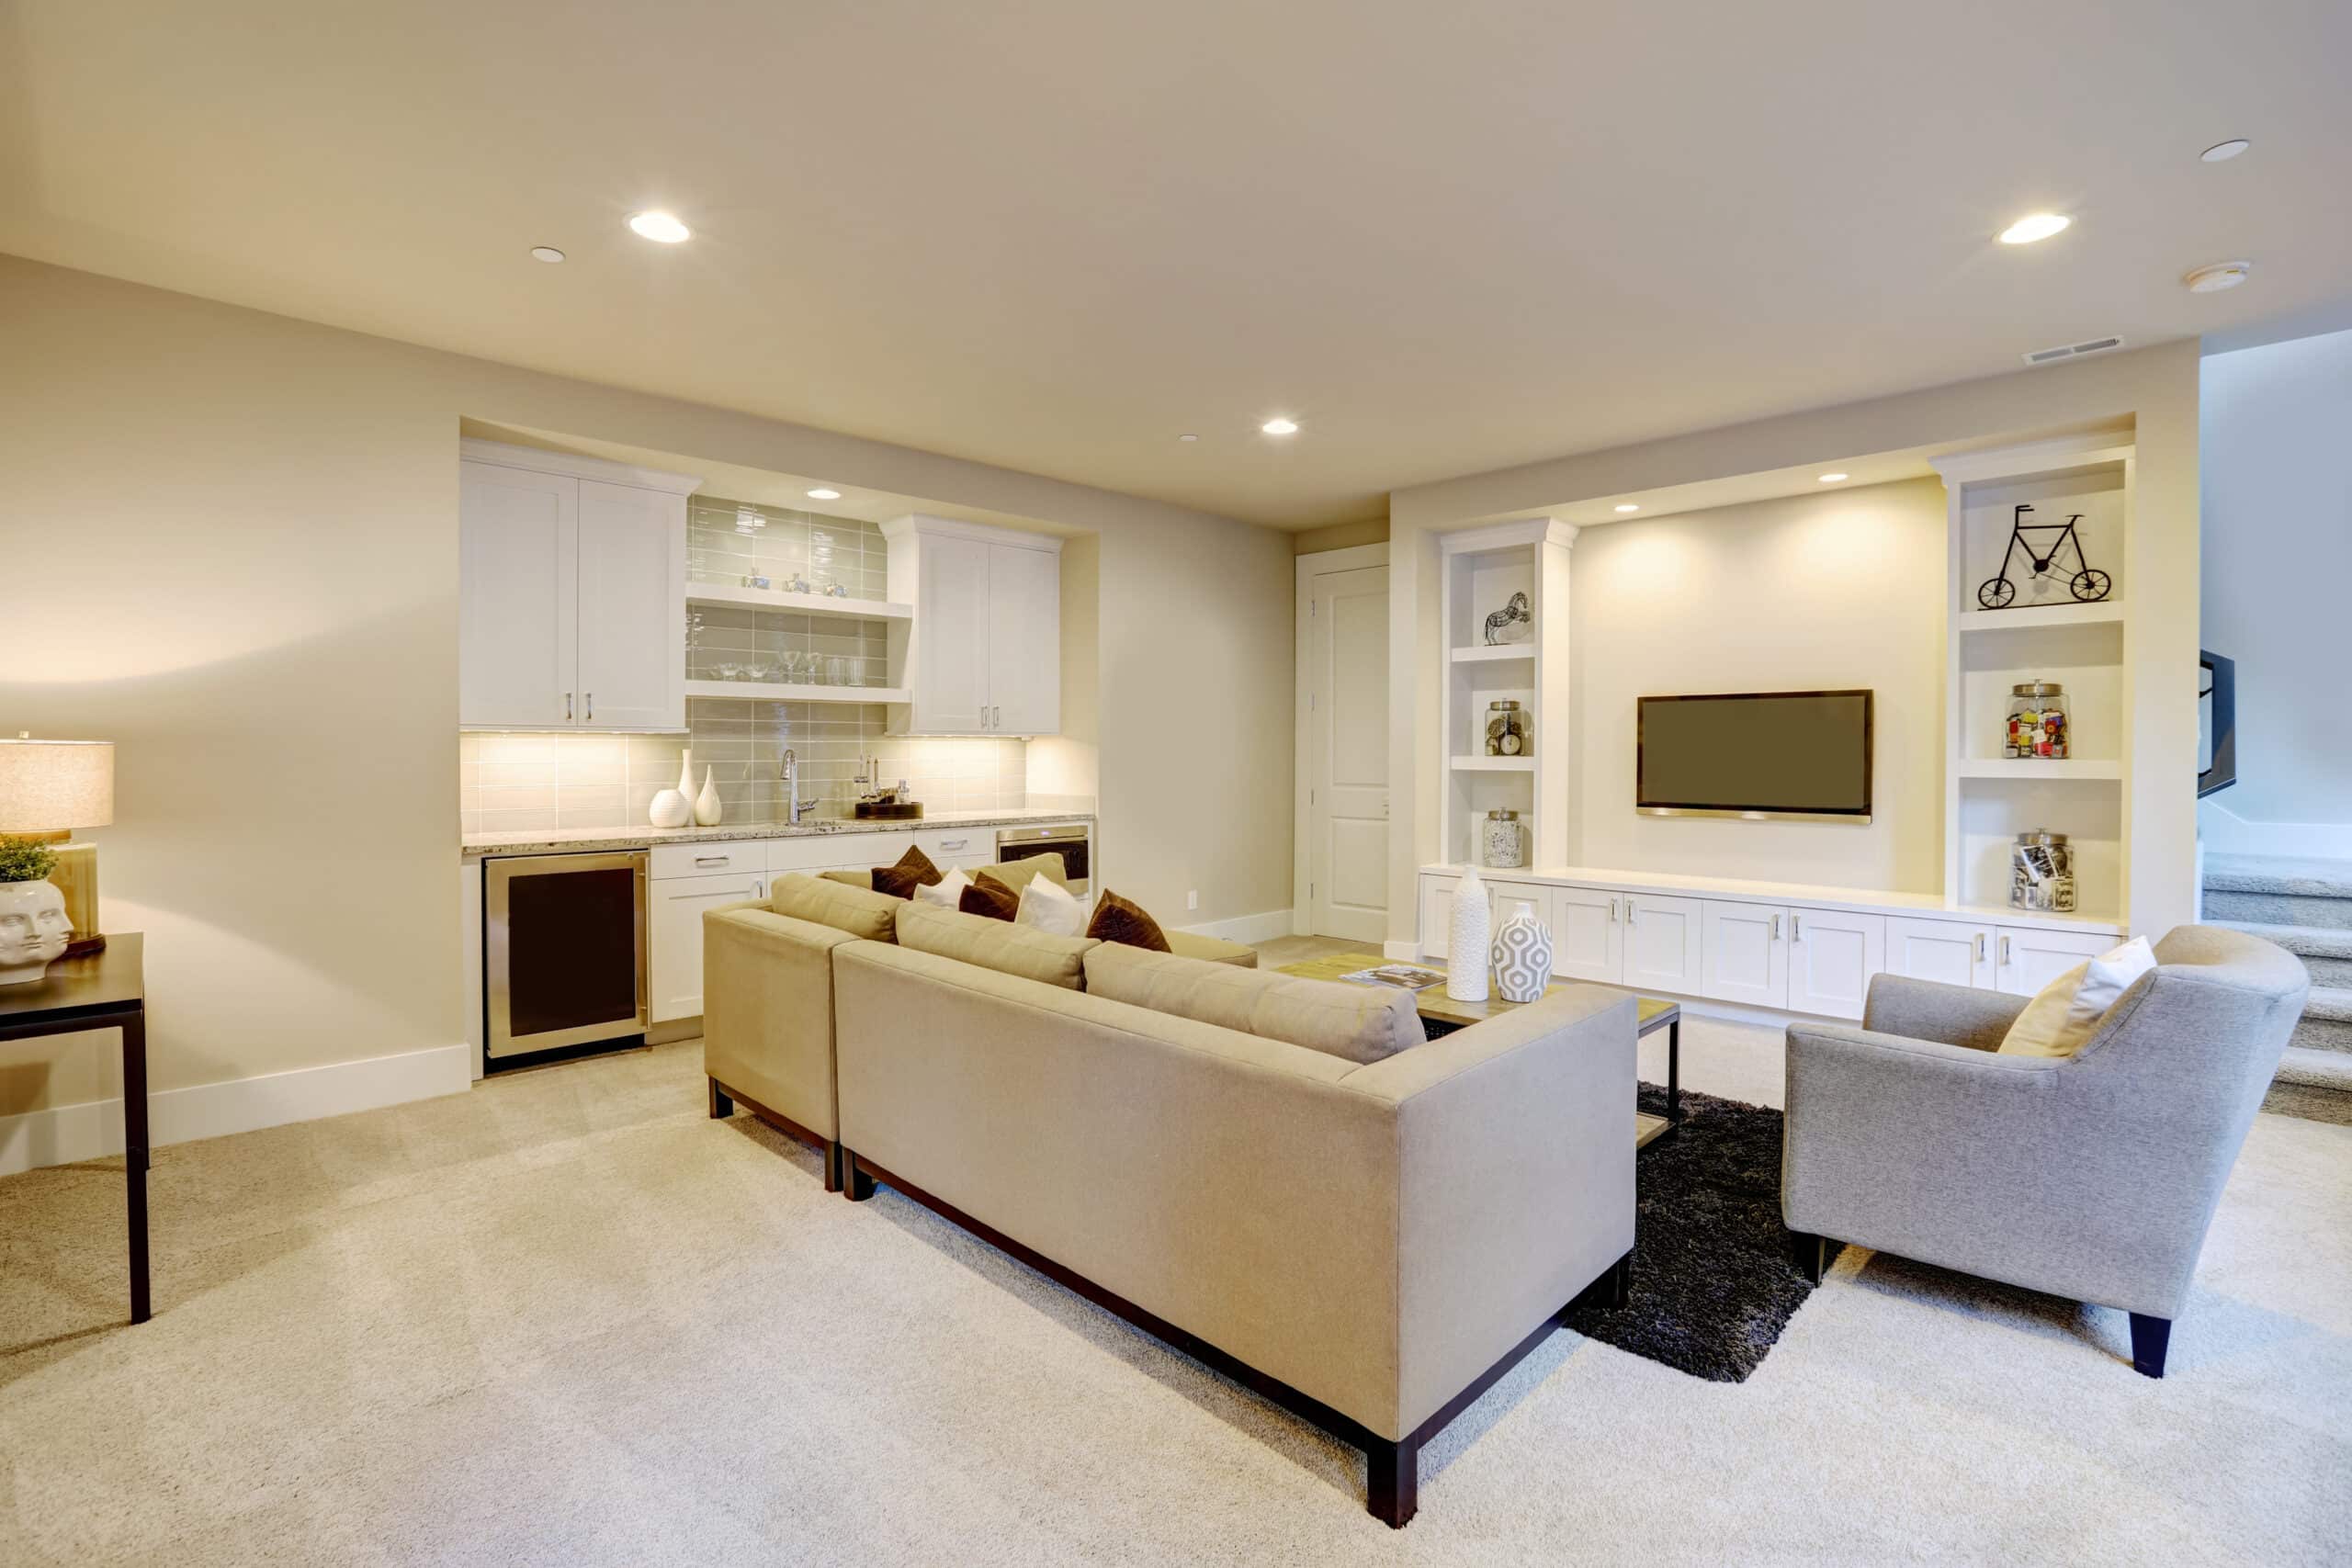 An elegant living room features a gray sectional facing a white built-in tv cabinet and wet bar mounted to a wall.